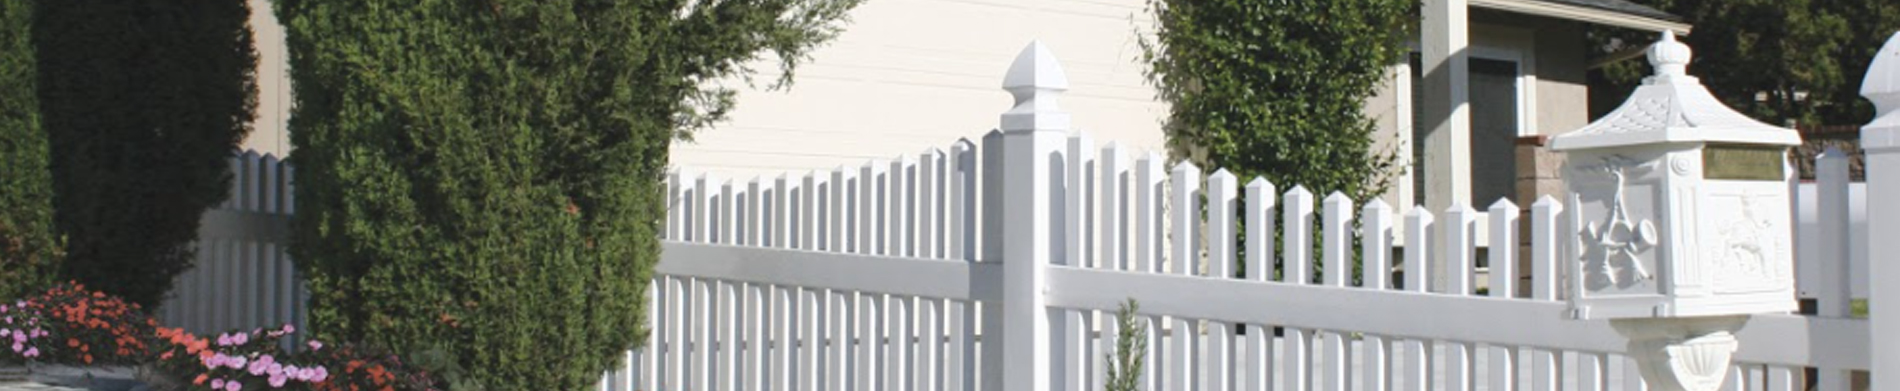 Duramax’s USA made vinyl fencing lasts longer and looks better